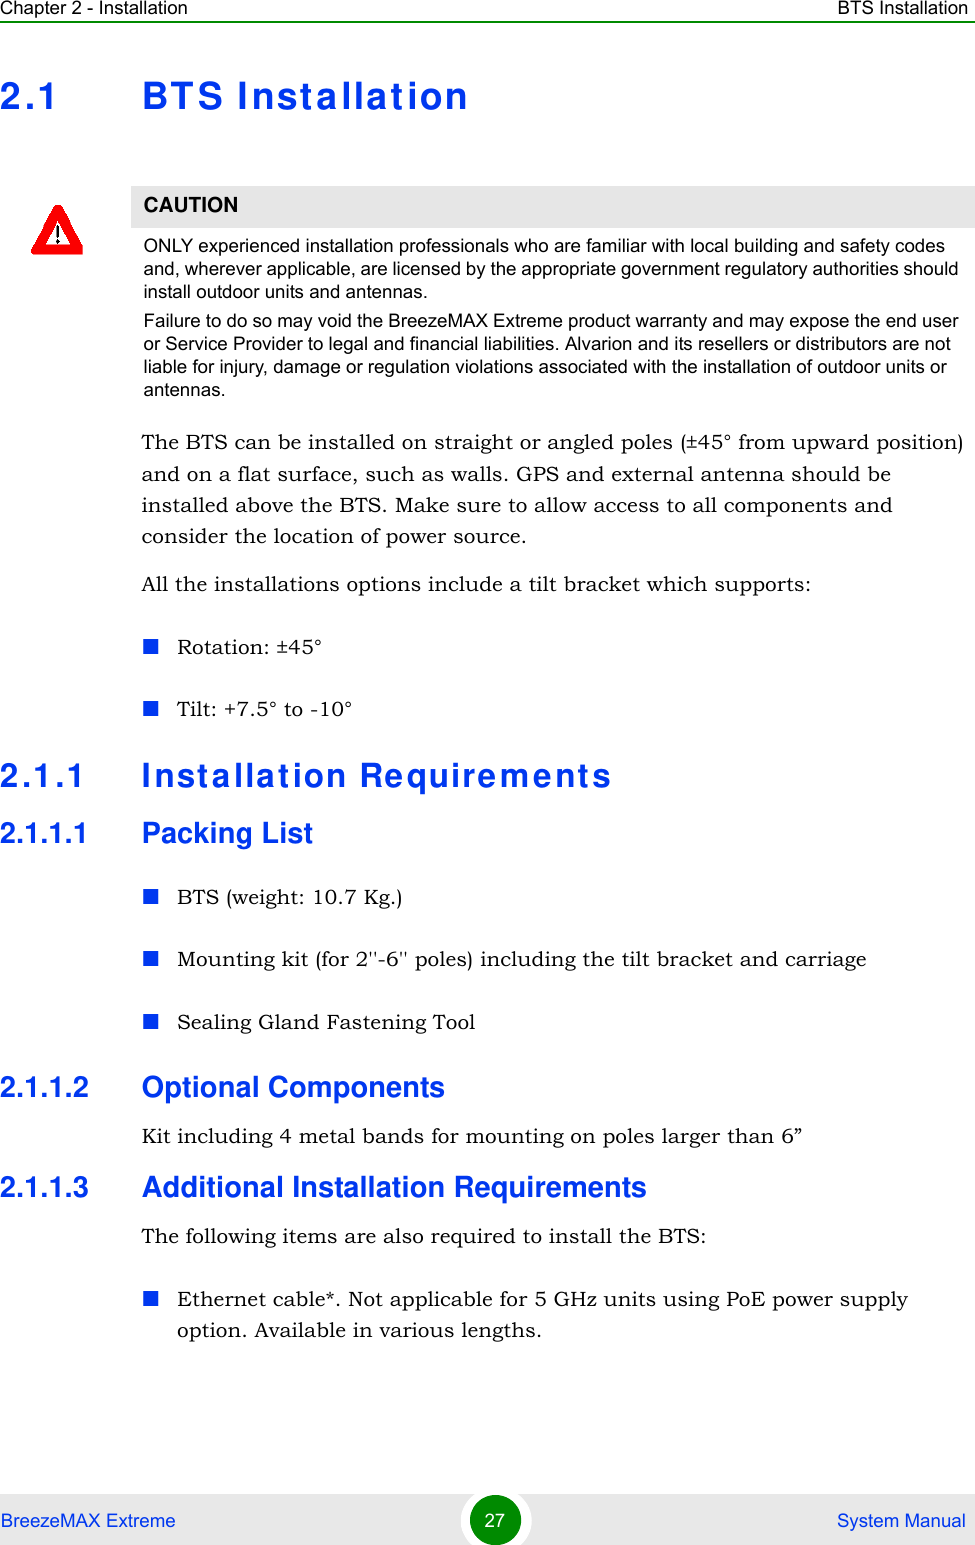 Chapter 2 - Installation BTS InstallationBreezeMAX Extreme 27  System Manual2.1 BTS InstallationThe BTS can be installed on straight or angled poles (±45° from upward position) and on a flat surface, such as walls. GPS and external antenna should be installed above the BTS. Make sure to allow access to all components and consider the location of power source.All the installations options include a tilt bracket which supports:Rotation: ±45°Tilt: +7.5° to -10°2.1.1 Installation Requirements2.1.1.1 Packing ListBTS (weight: 10.7 Kg.)Mounting kit (for 2&apos;&apos;-6&apos;&apos; poles) including the tilt bracket and carriage Sealing Gland Fastening Tool2.1.1.2 Optional ComponentsKit including 4 metal bands for mounting on poles larger than 6”2.1.1.3 Additional Installation RequirementsThe following items are also required to install the BTS:Ethernet cable*. Not applicable for 5 GHz units using PoE power supply option. Available in various lengths.CAUTIONONLY experienced installation professionals who are familiar with local building and safety codes and, wherever applicable, are licensed by the appropriate government regulatory authorities should install outdoor units and antennas.Failure to do so may void the BreezeMAX Extreme product warranty and may expose the end user or Service Provider to legal and financial liabilities. Alvarion and its resellers or distributors are not liable for injury, damage or regulation violations associated with the installation of outdoor units or antennas.